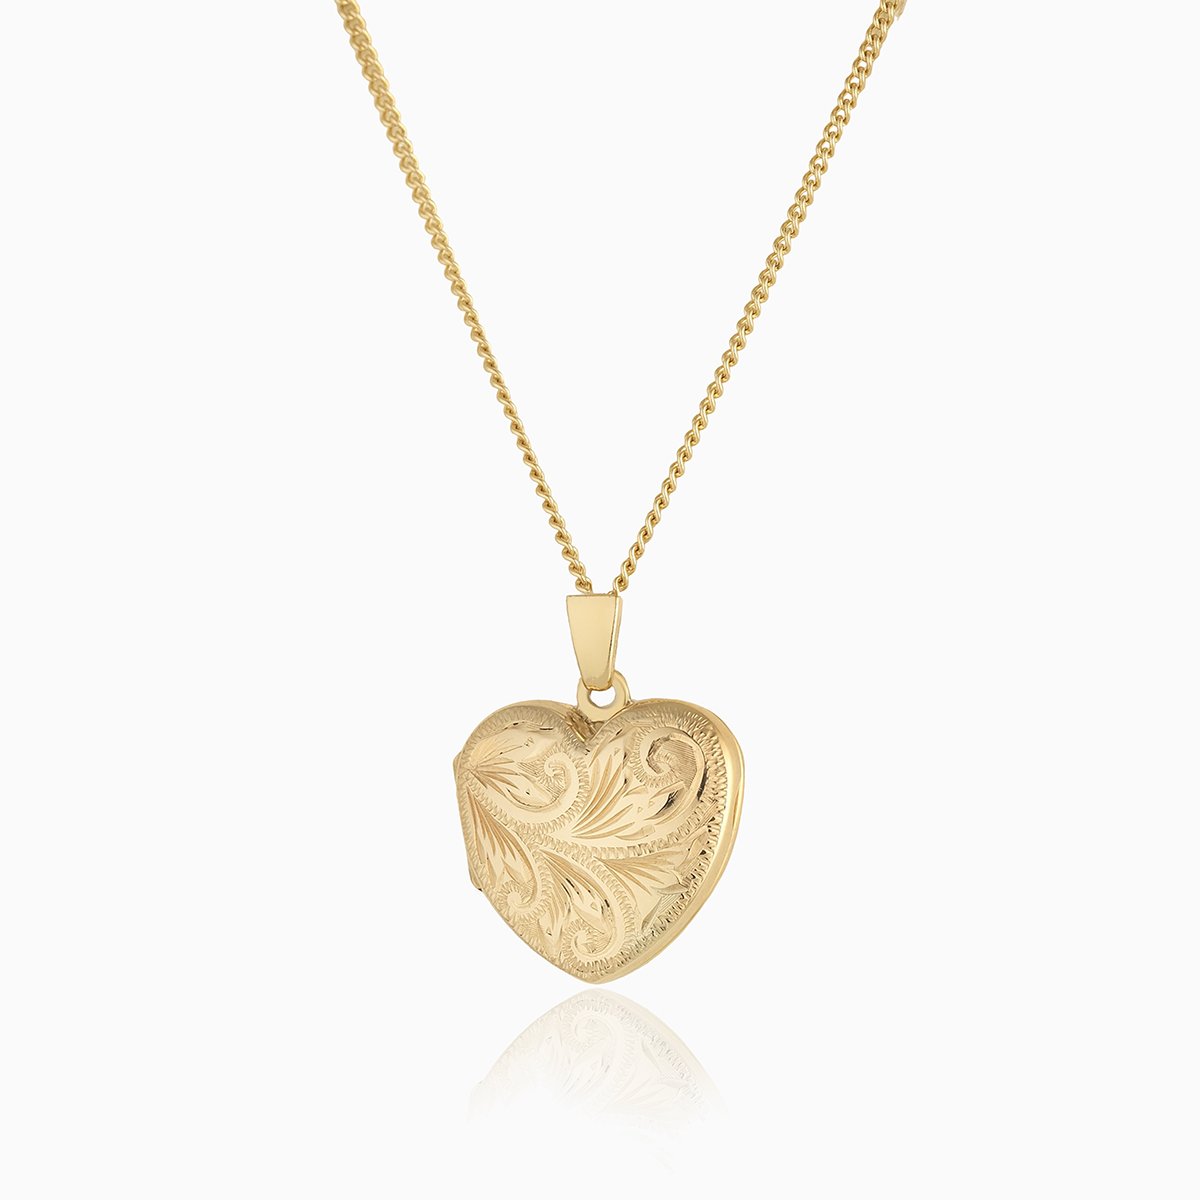 Front shot of a 9 ct gold engraved heart locket on a 9 ct gold curb chain.